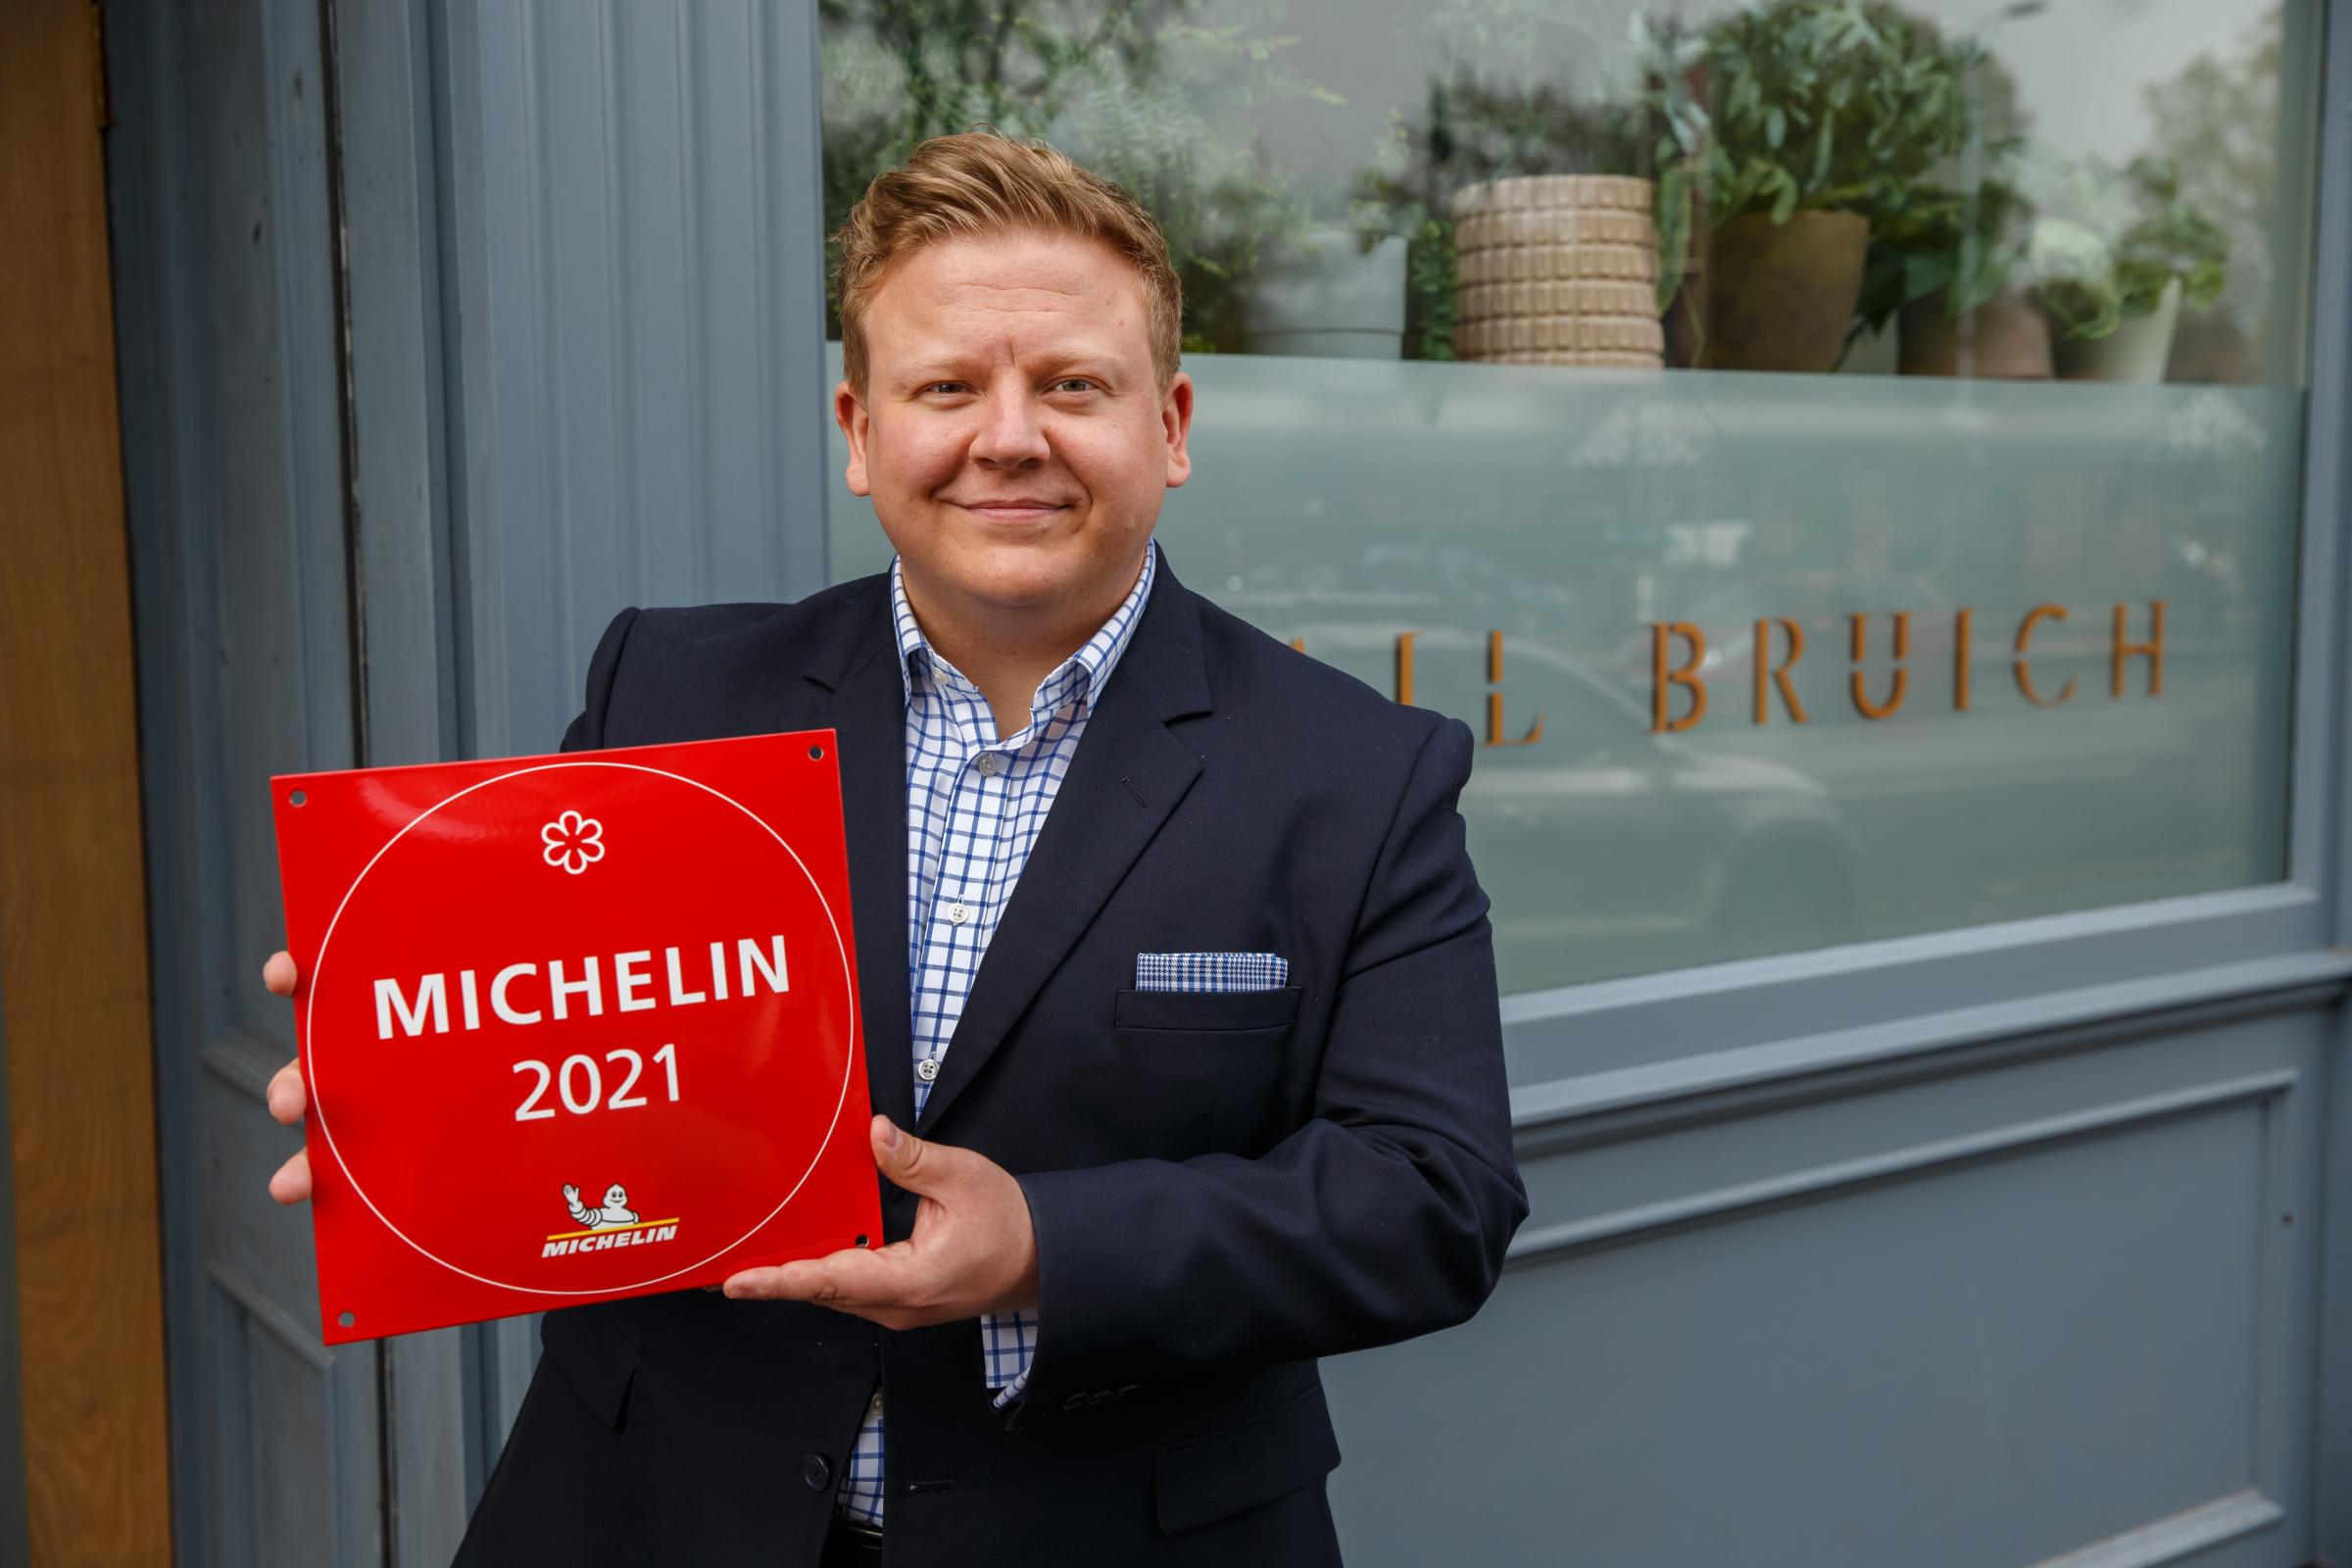 Cail Bruich general manager Chris Donnachie holding the Michelin star plaque that the restaurant received recently. Photograph by Colin Mearns.